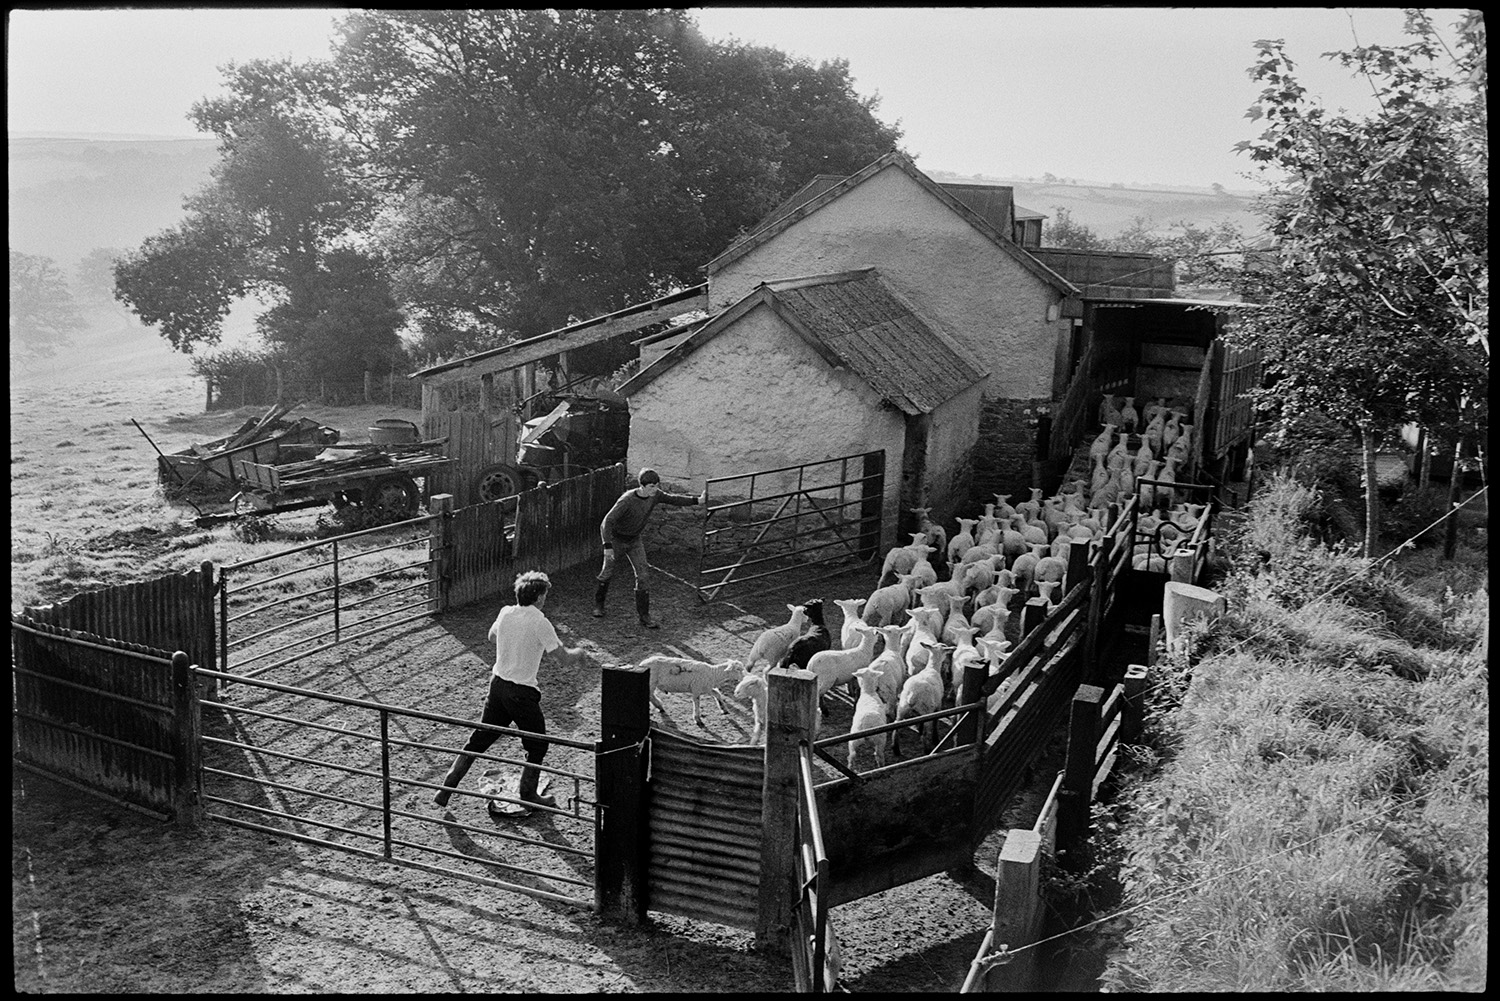 Rounding up sheep, farmyard and distant view, early morning. Bringing in sick lamb. 
[Members of the Cole family herding sheep into a trailer in the farmyard at Densham, Ashreigney. Farm buildings, machinery and trees can be seen in the background.]